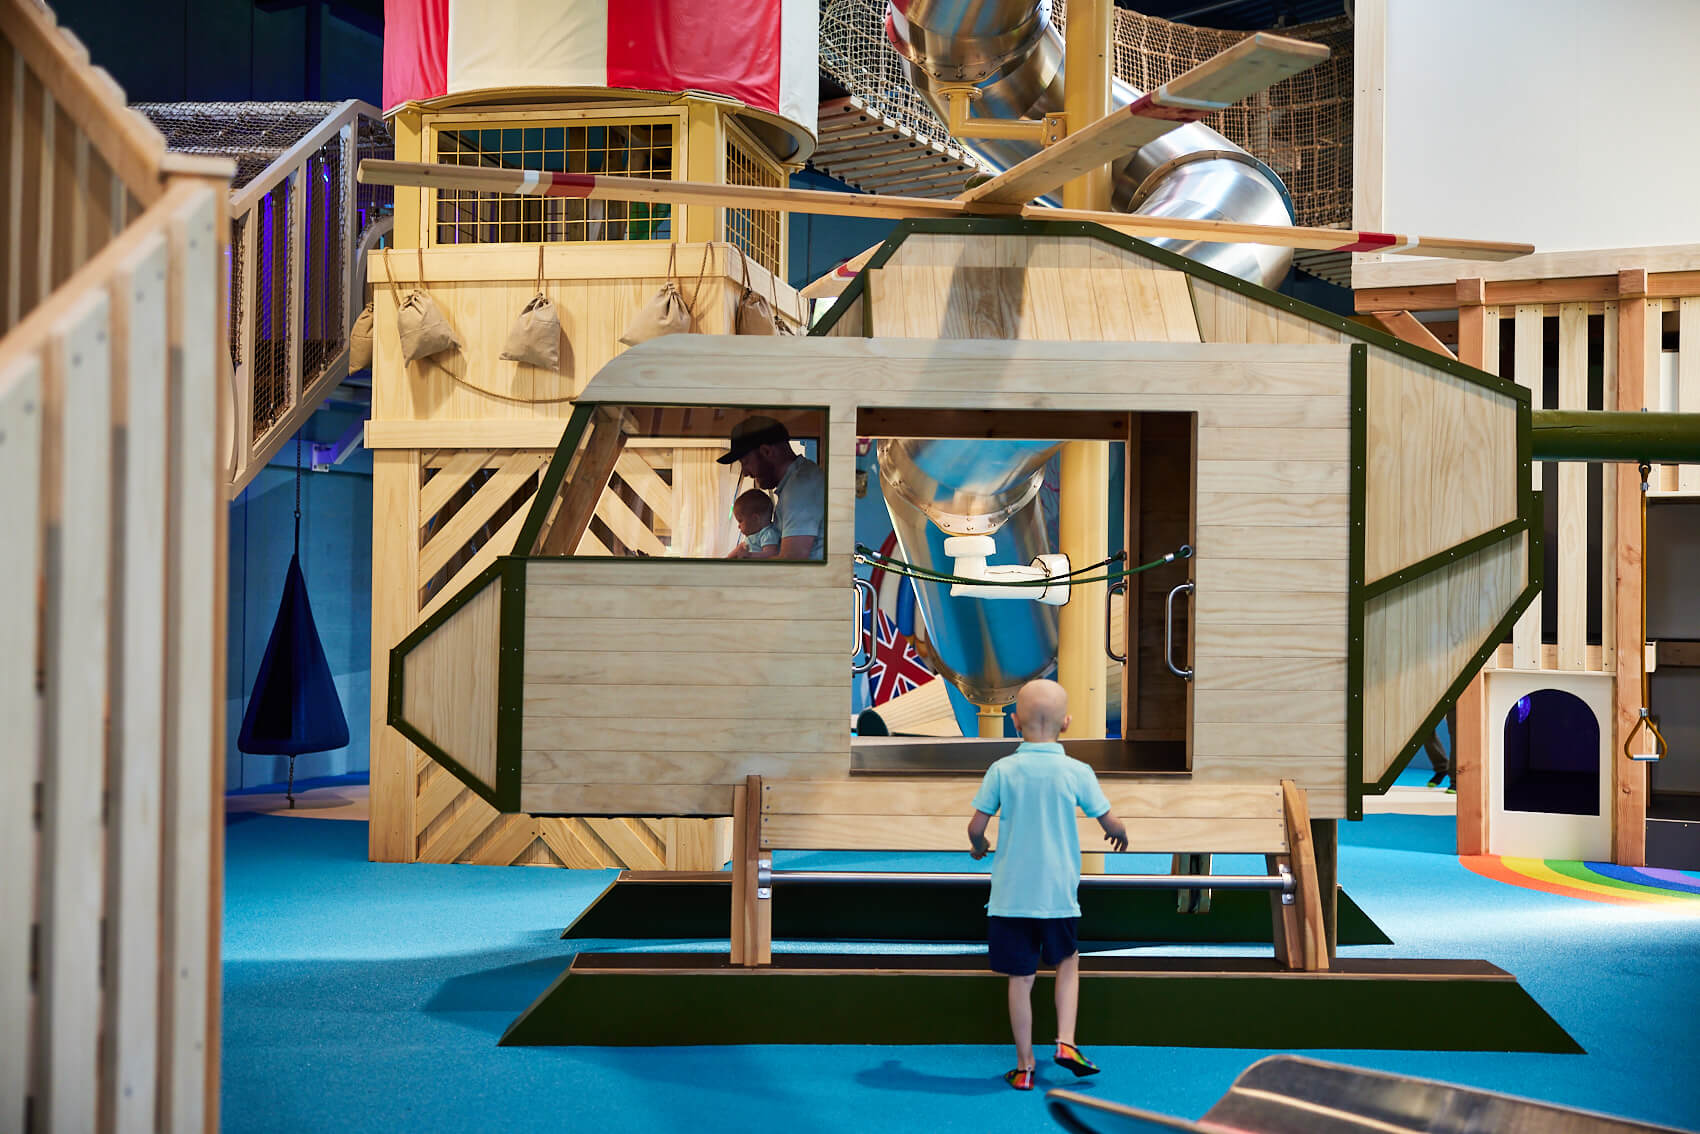 Helicopter in the Playhive, indoor play centre